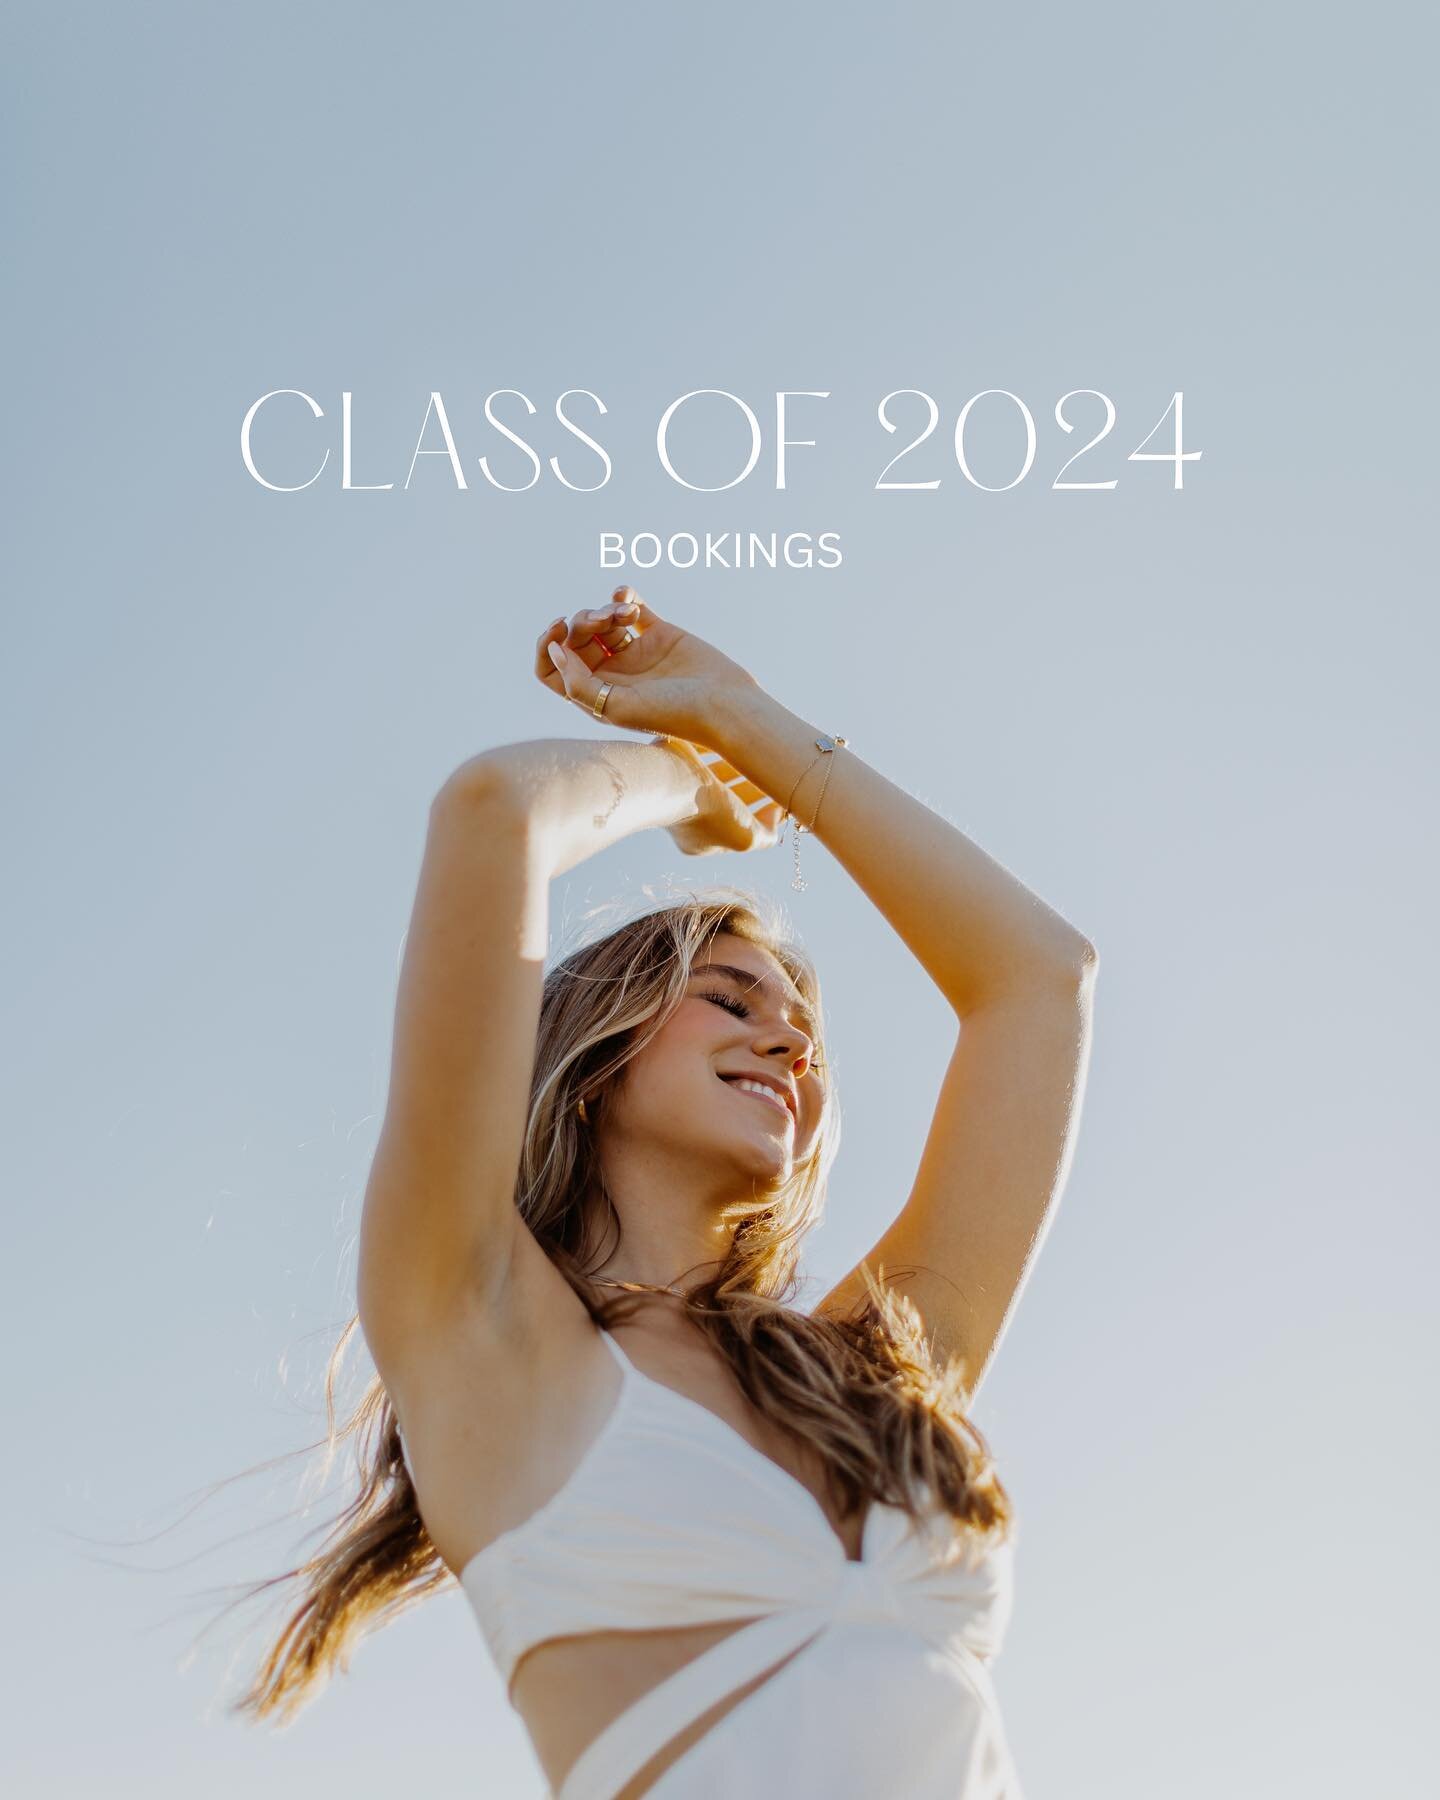 It&rsquo;s about that time of the year again.. Class of 2024 bookings 🥳📸

WOW I&rsquo;ve had a ton of emails/inquiries regarding senior sessions and just wanted to say thank you to those who have already expressed interest. I appreciate all of you!